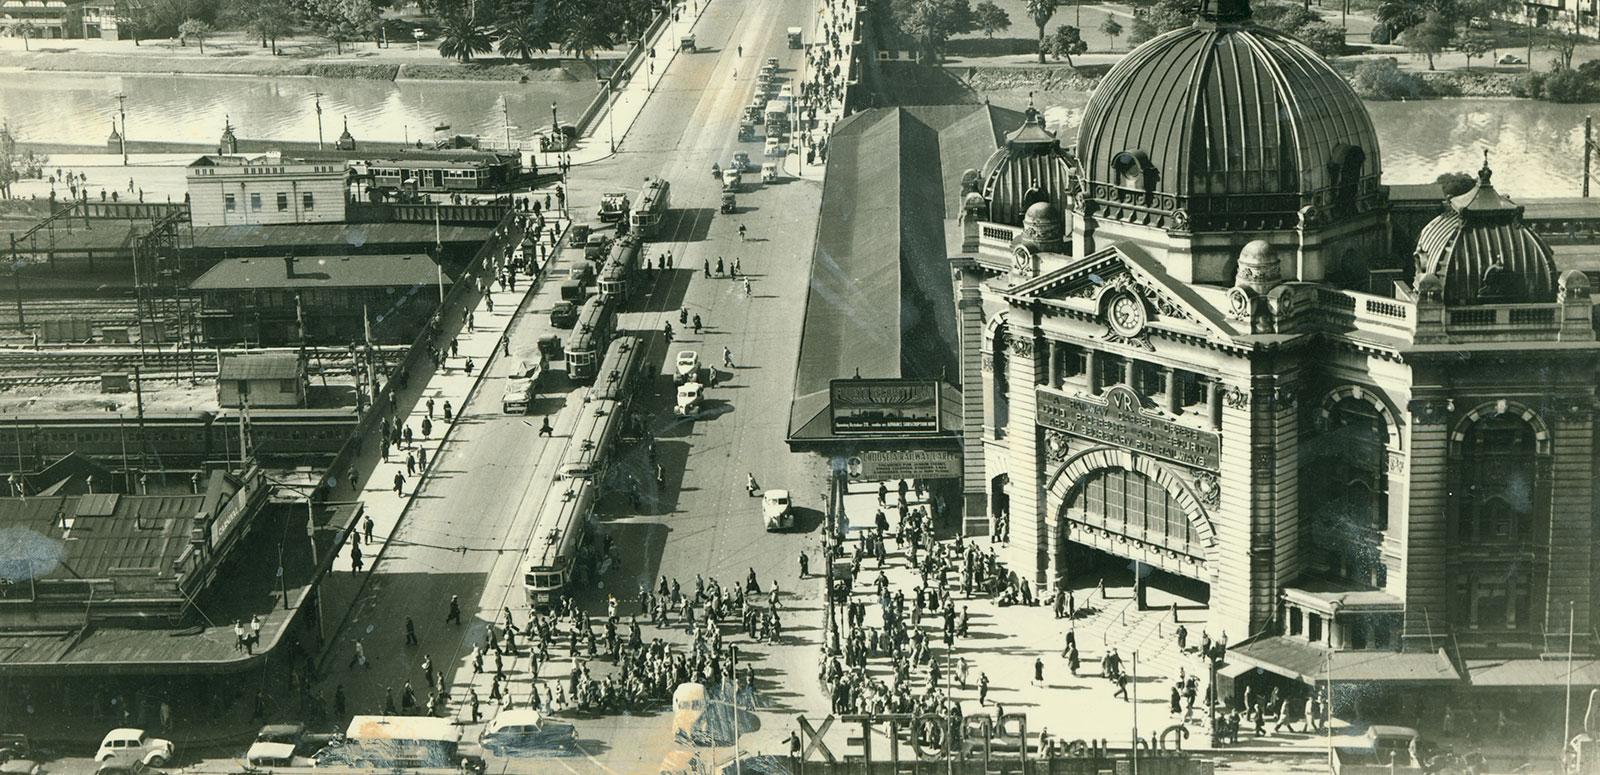 An overhead shot of Flinders St Station and Flinders Street in Melbourne in the early 20th Century